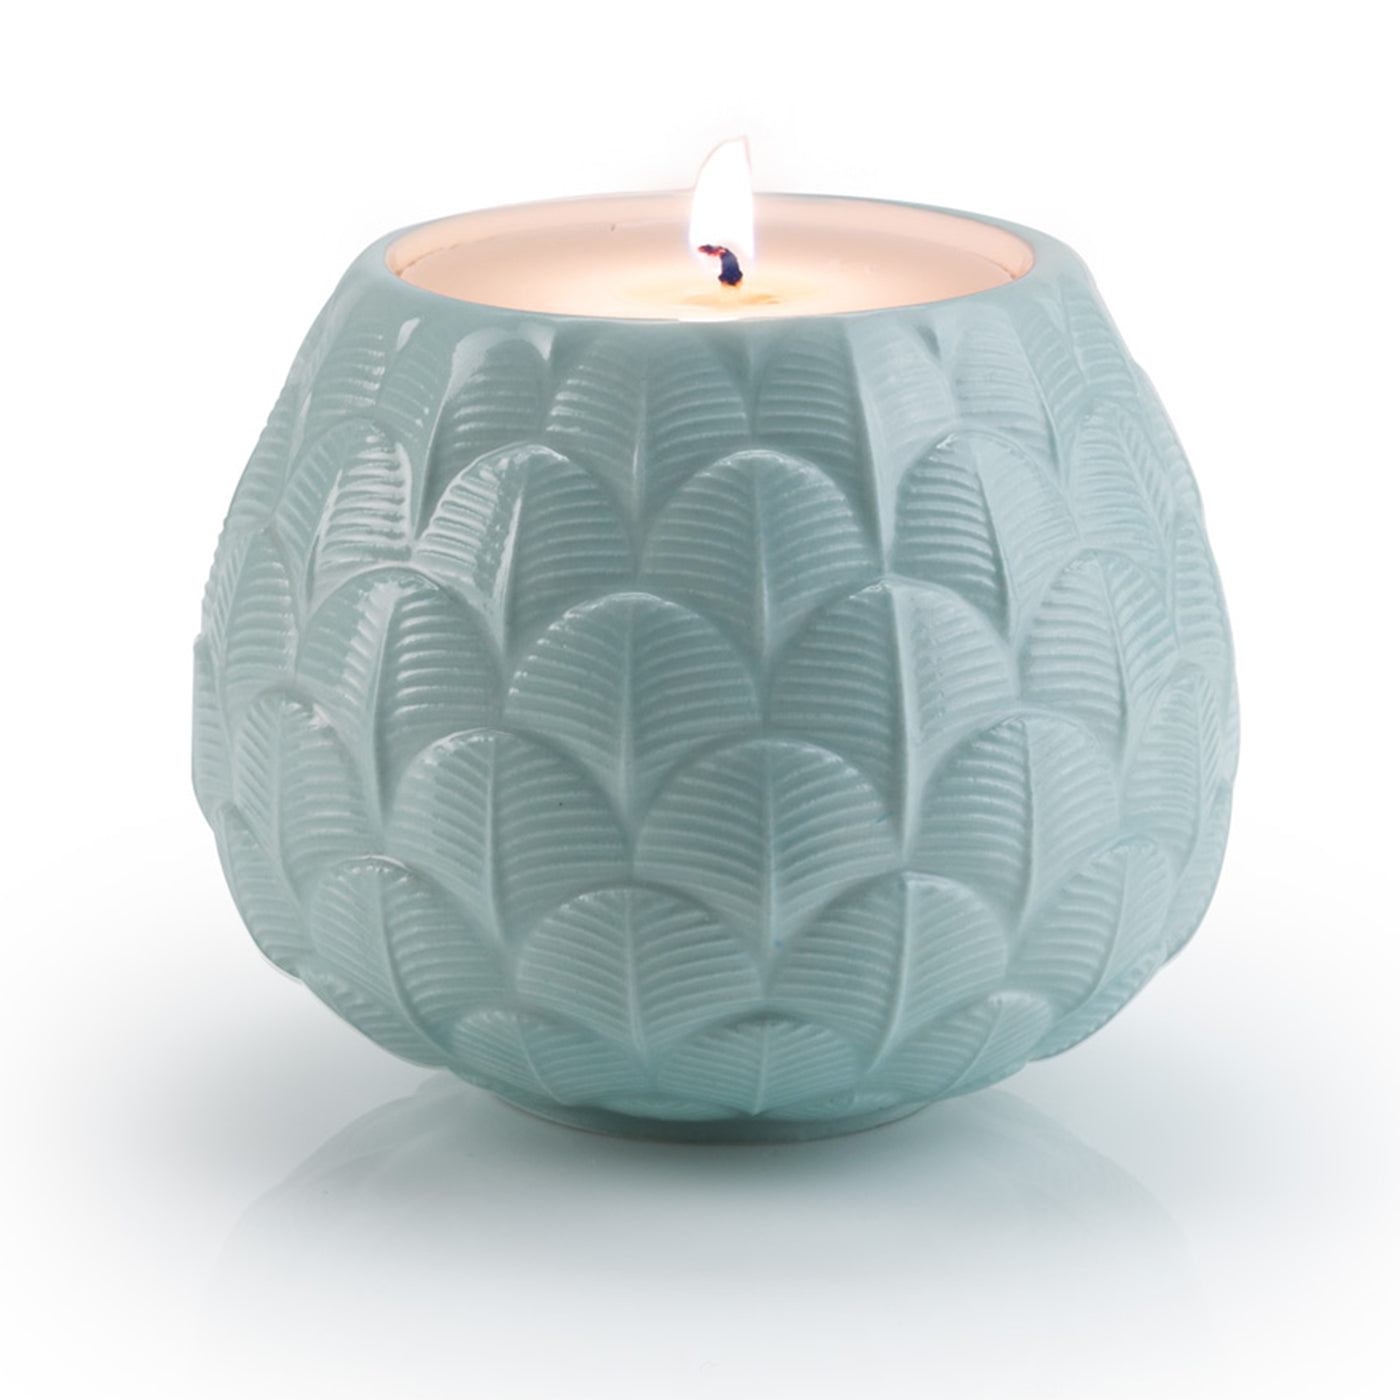 CHARLOTTE PEACOCK CANDLE COVER -LIGHT BLUE - Alternative view 1